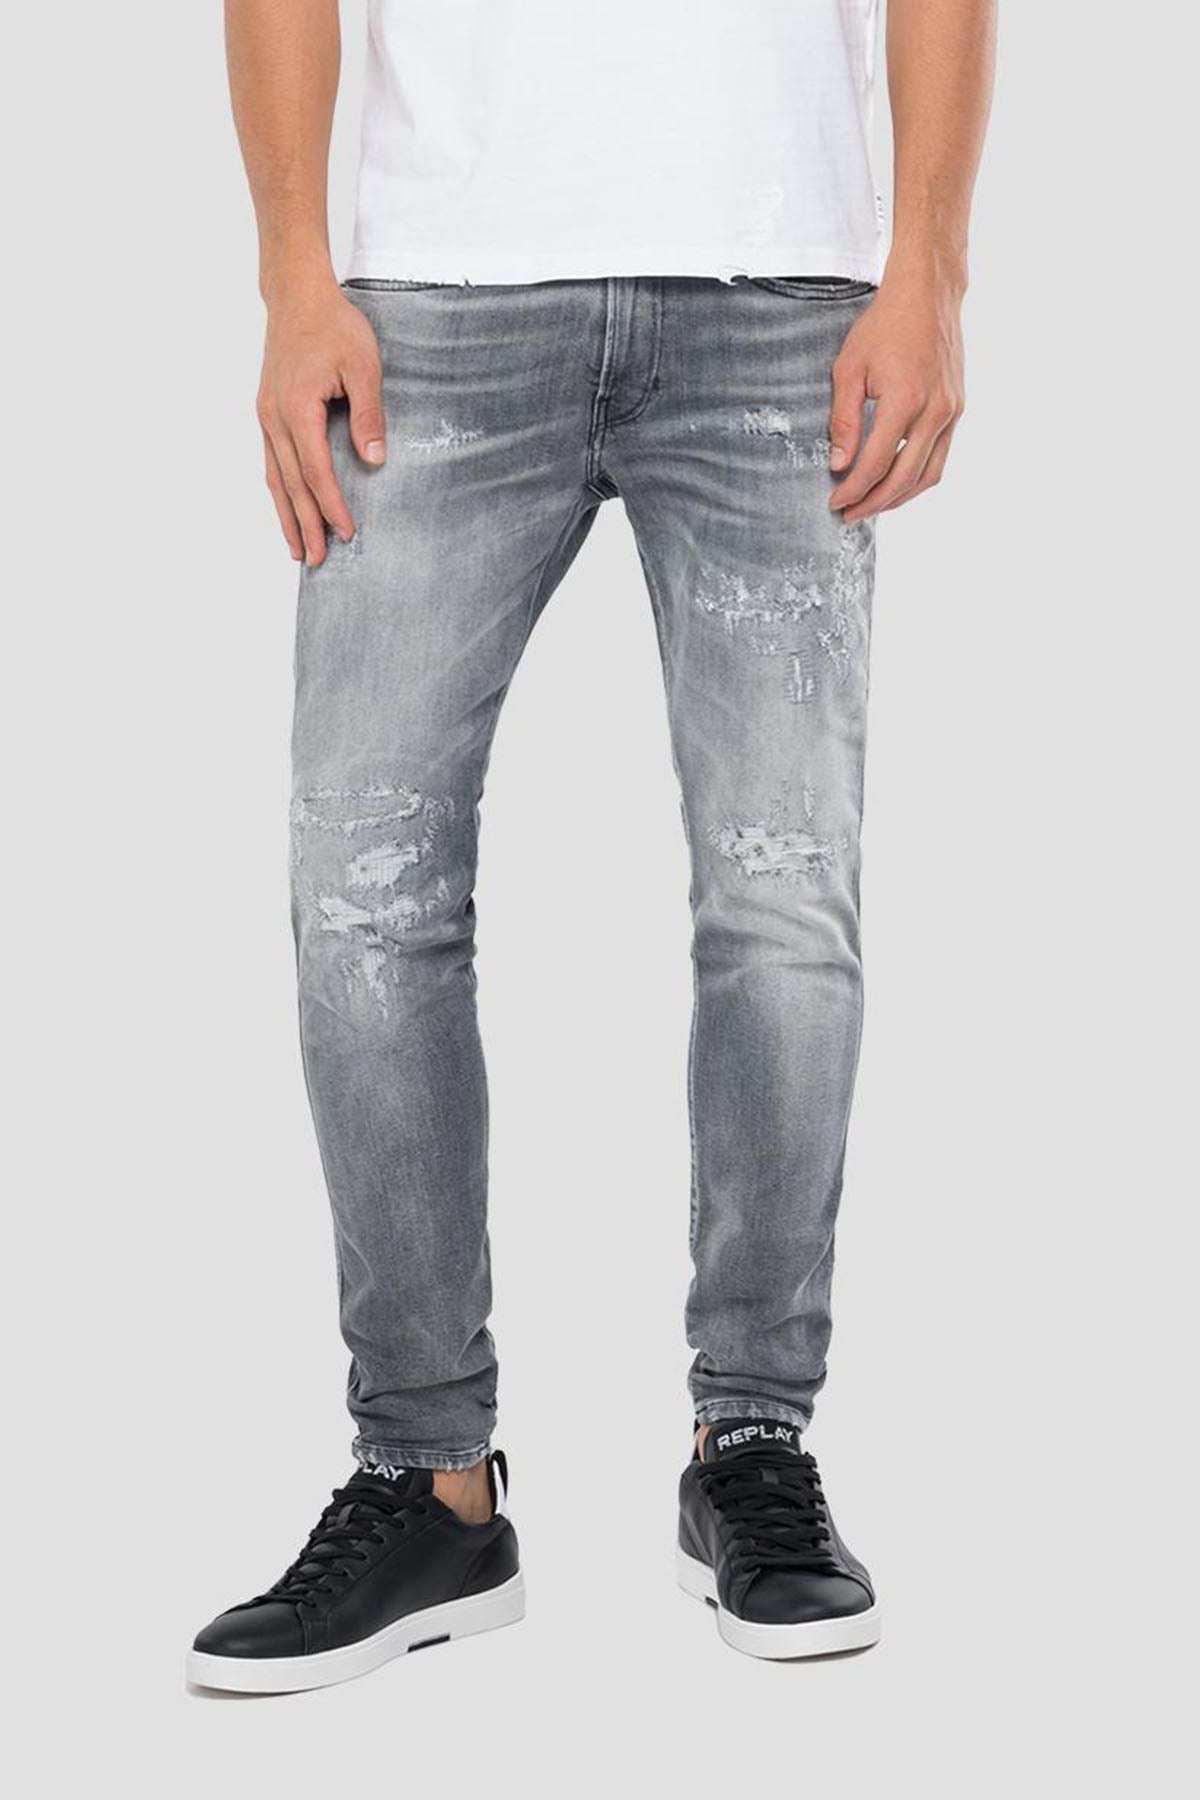 Replay Bronny Super Slim Fit Jeans-Libas Trendy Fashion Store